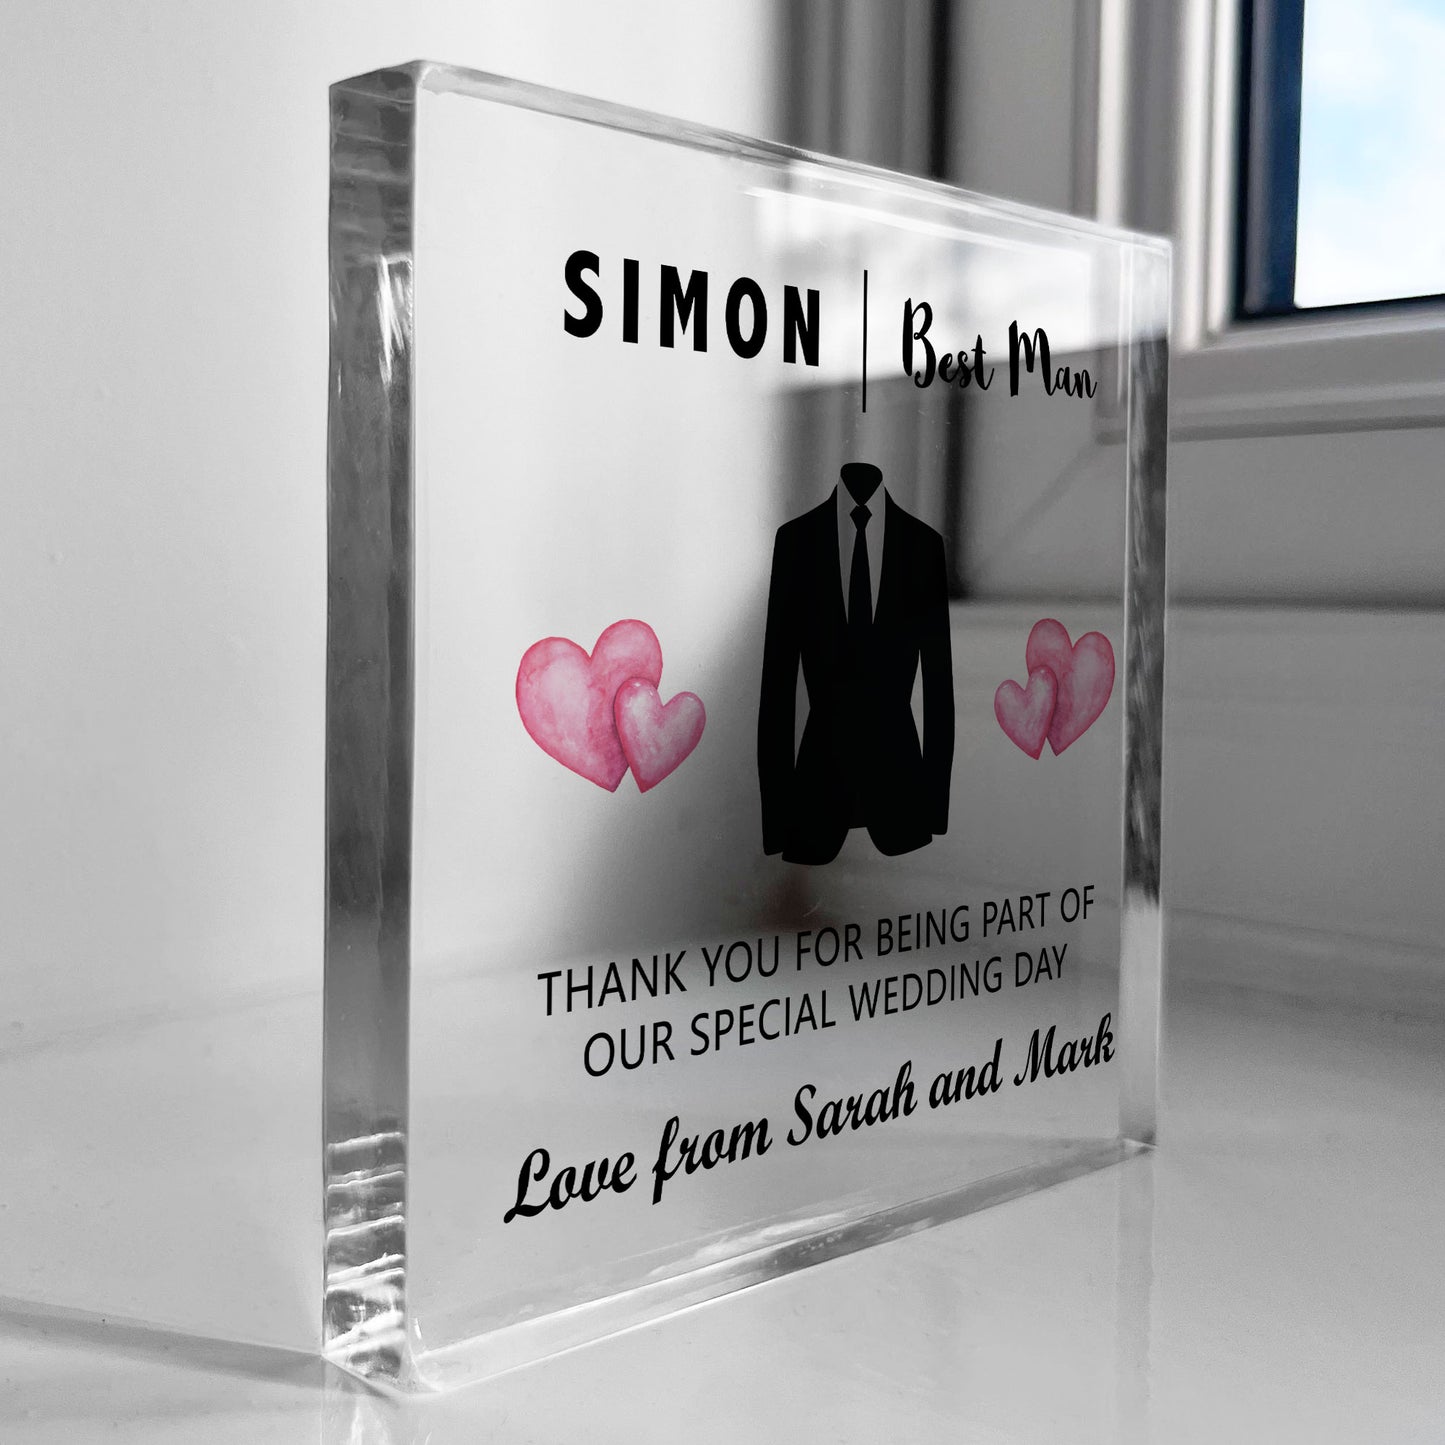 Best Man Thank You Gifts Personalised Acrylic Block Usher Gift